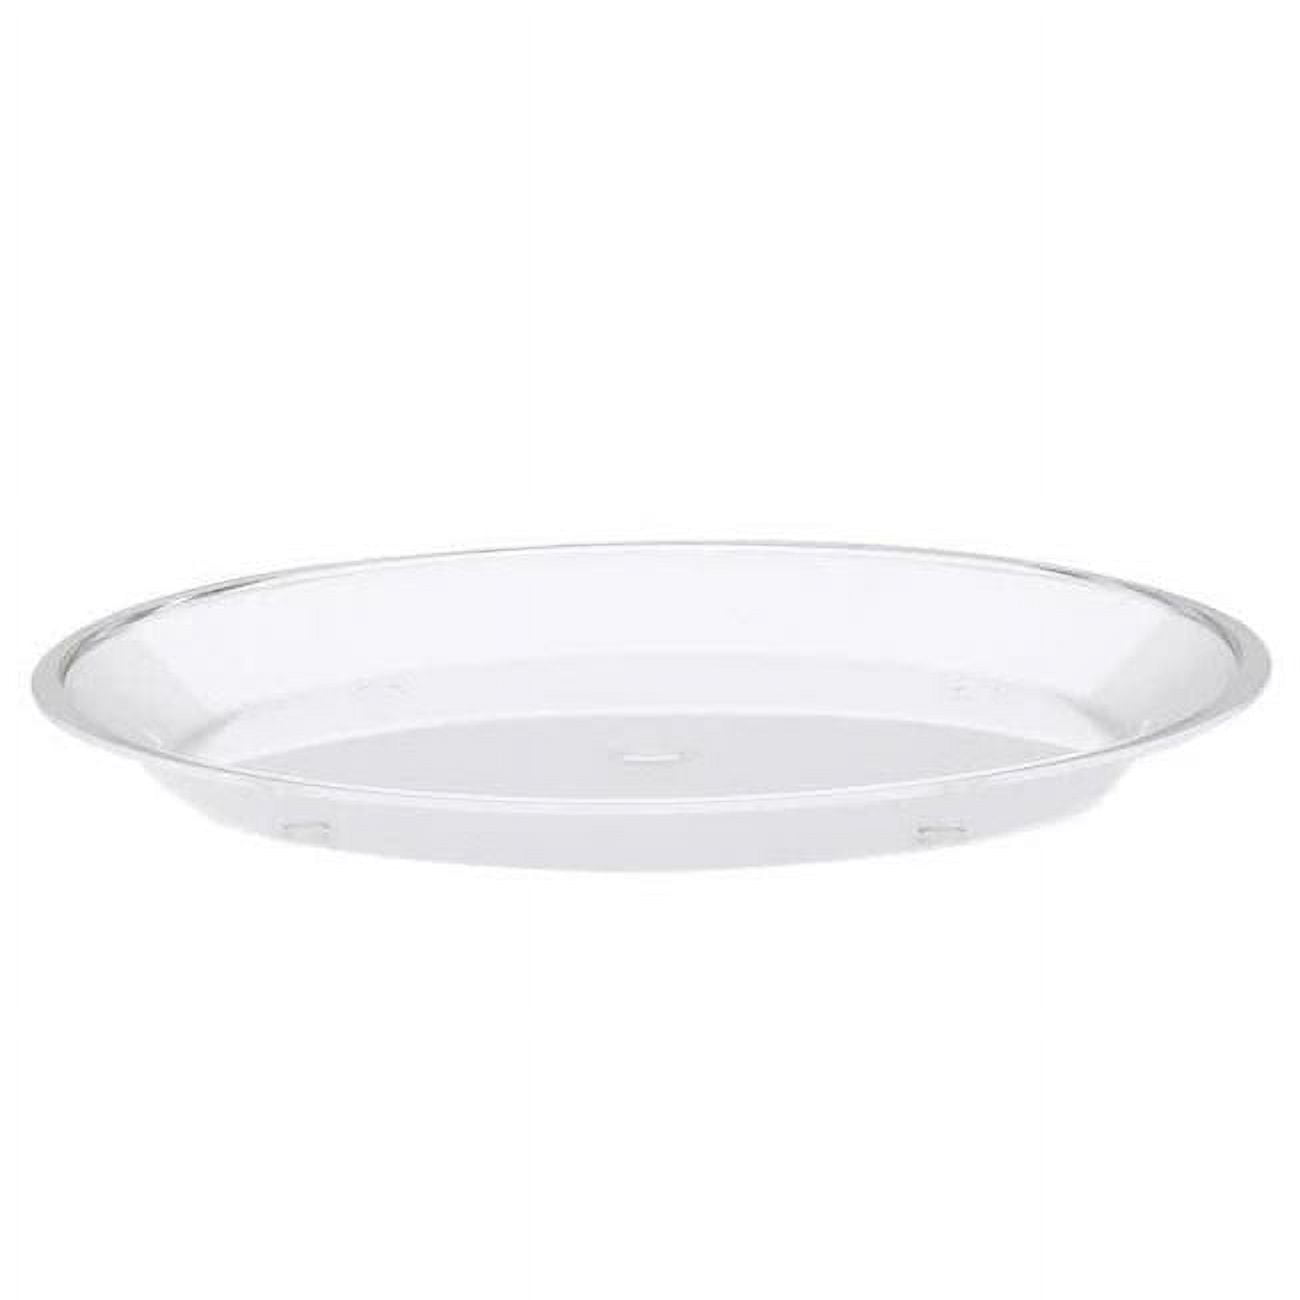 Picture of Cal Mil 315-10-12 10 in. Round Shallow Tray - Clear